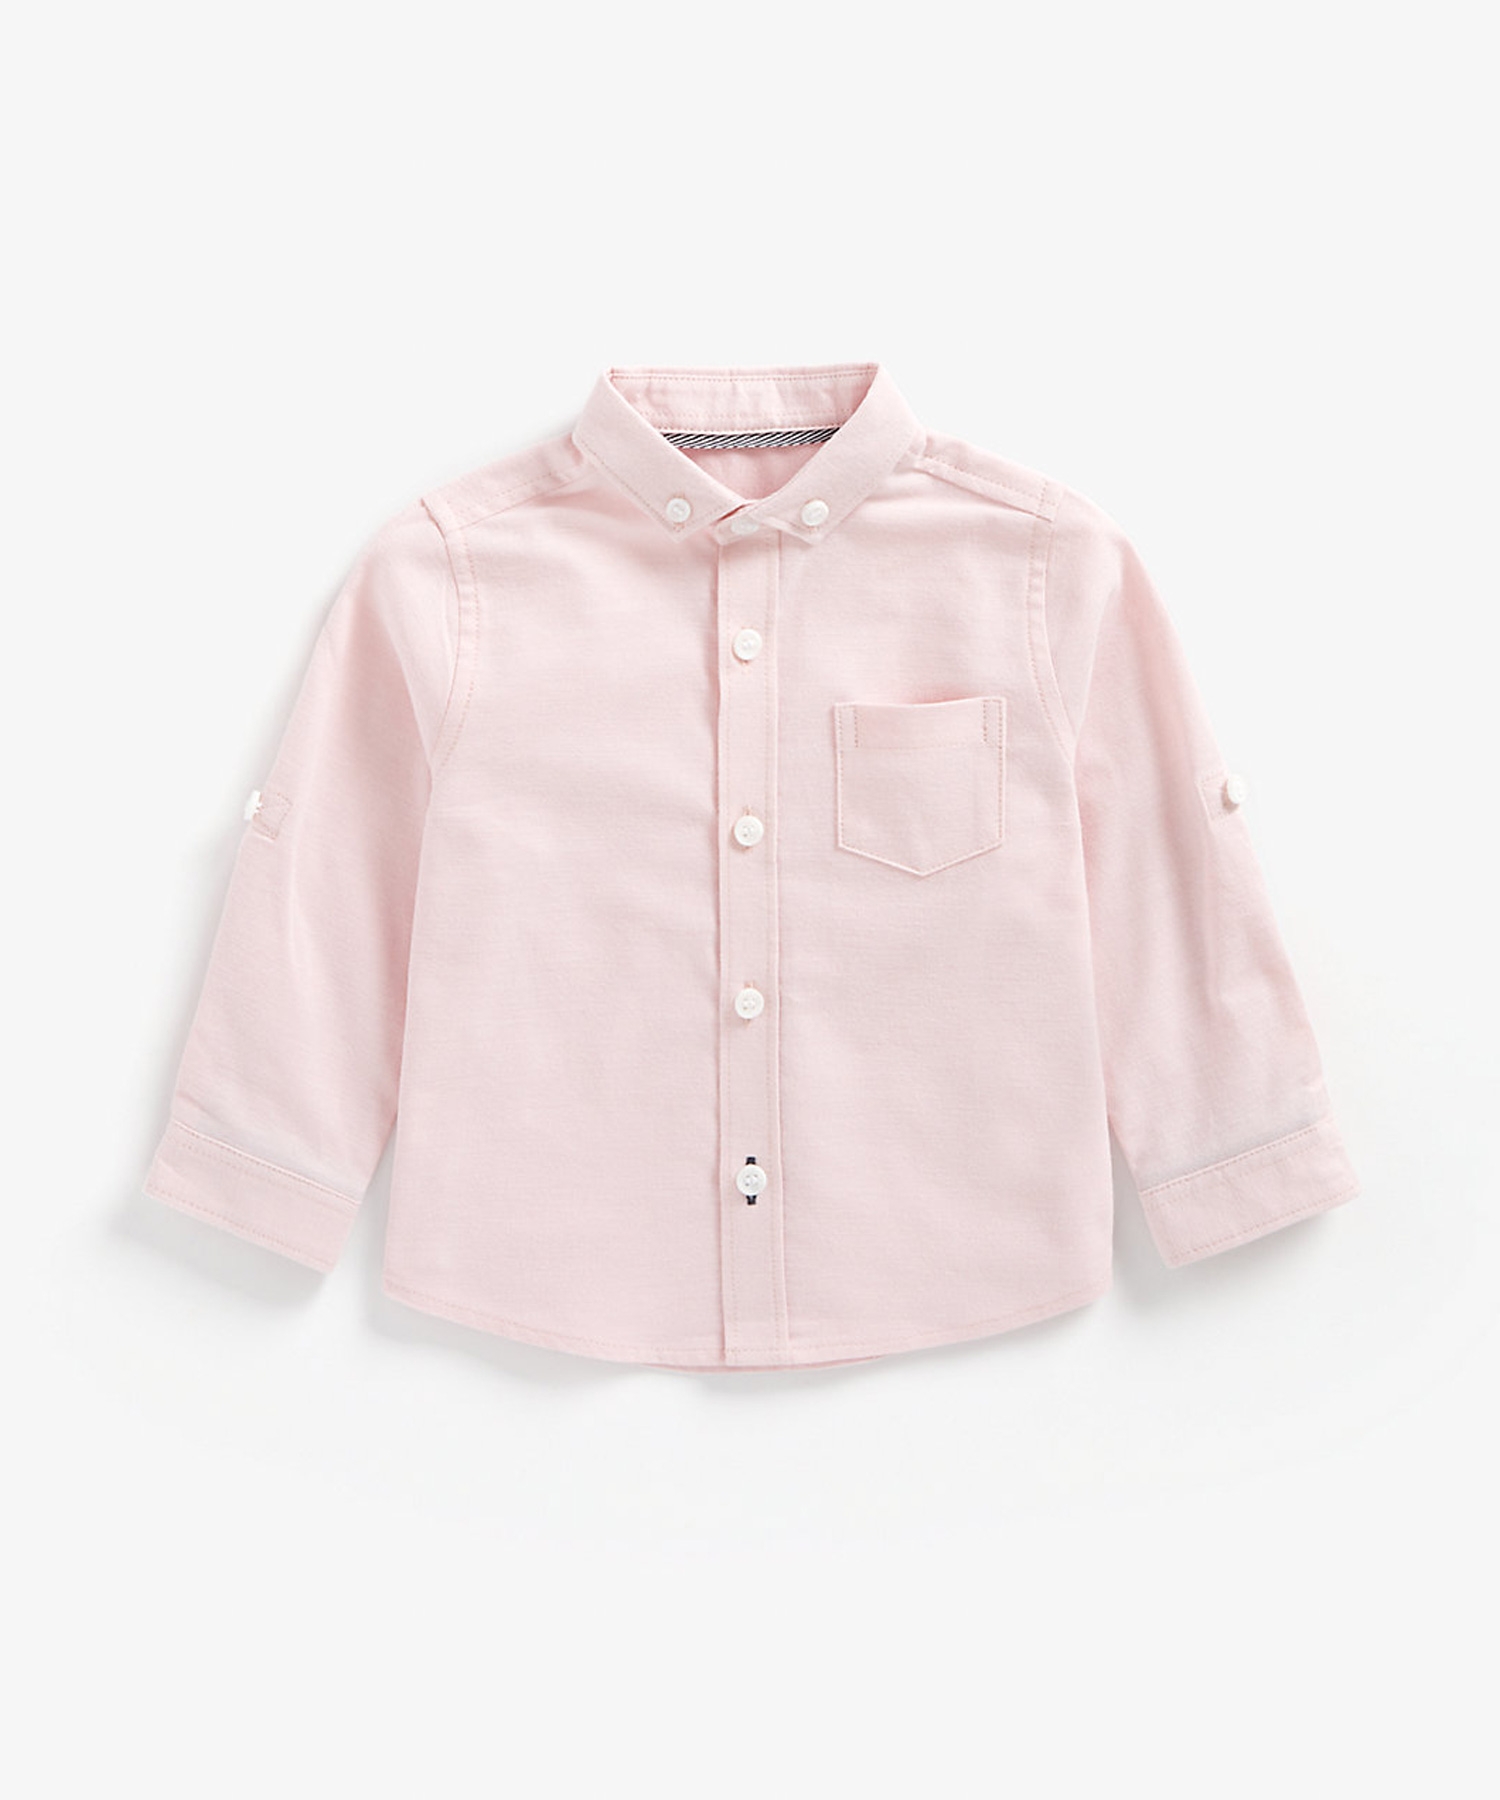 Mothercare | Boys Full Sleeves Oxford Shirt - Pink